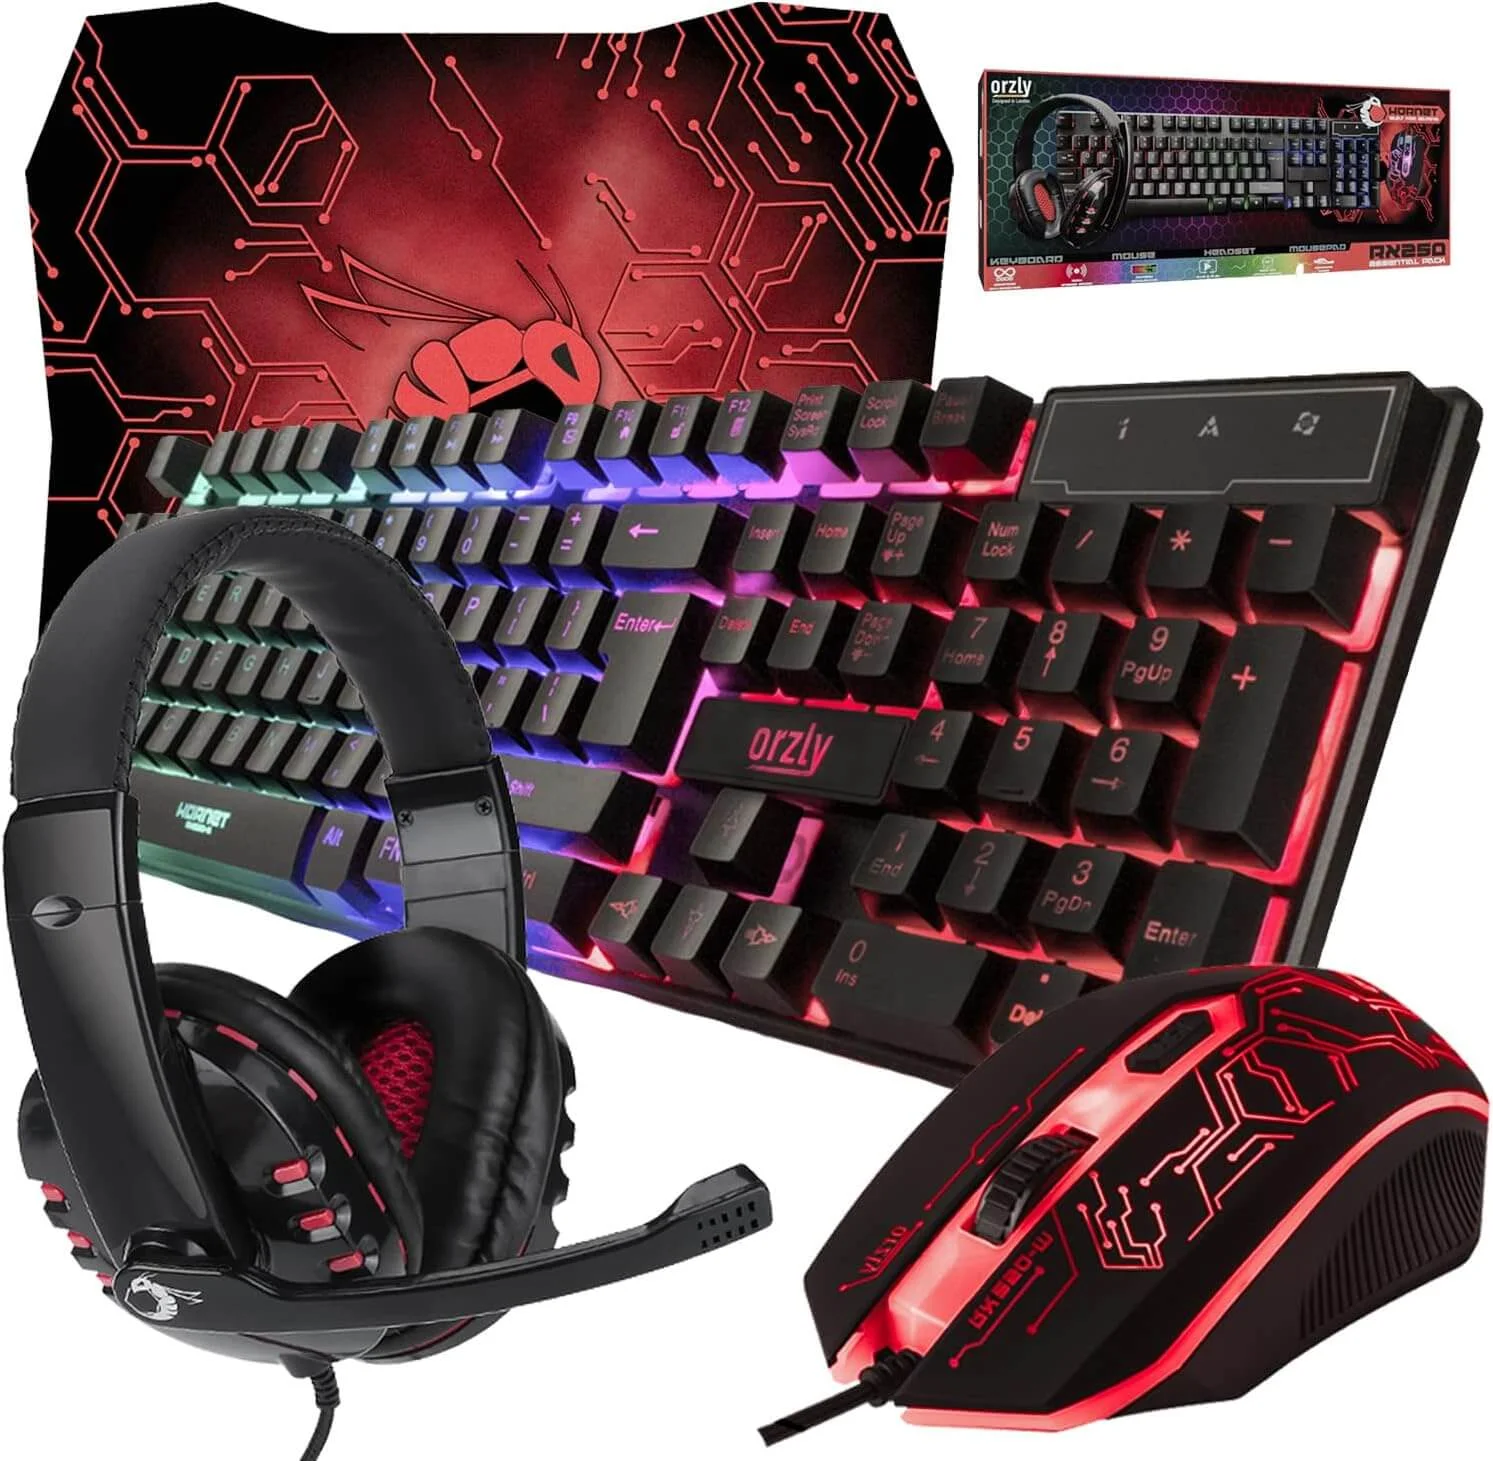 Gaming set: keyboard, mouse and headset - gifts for teenage boys